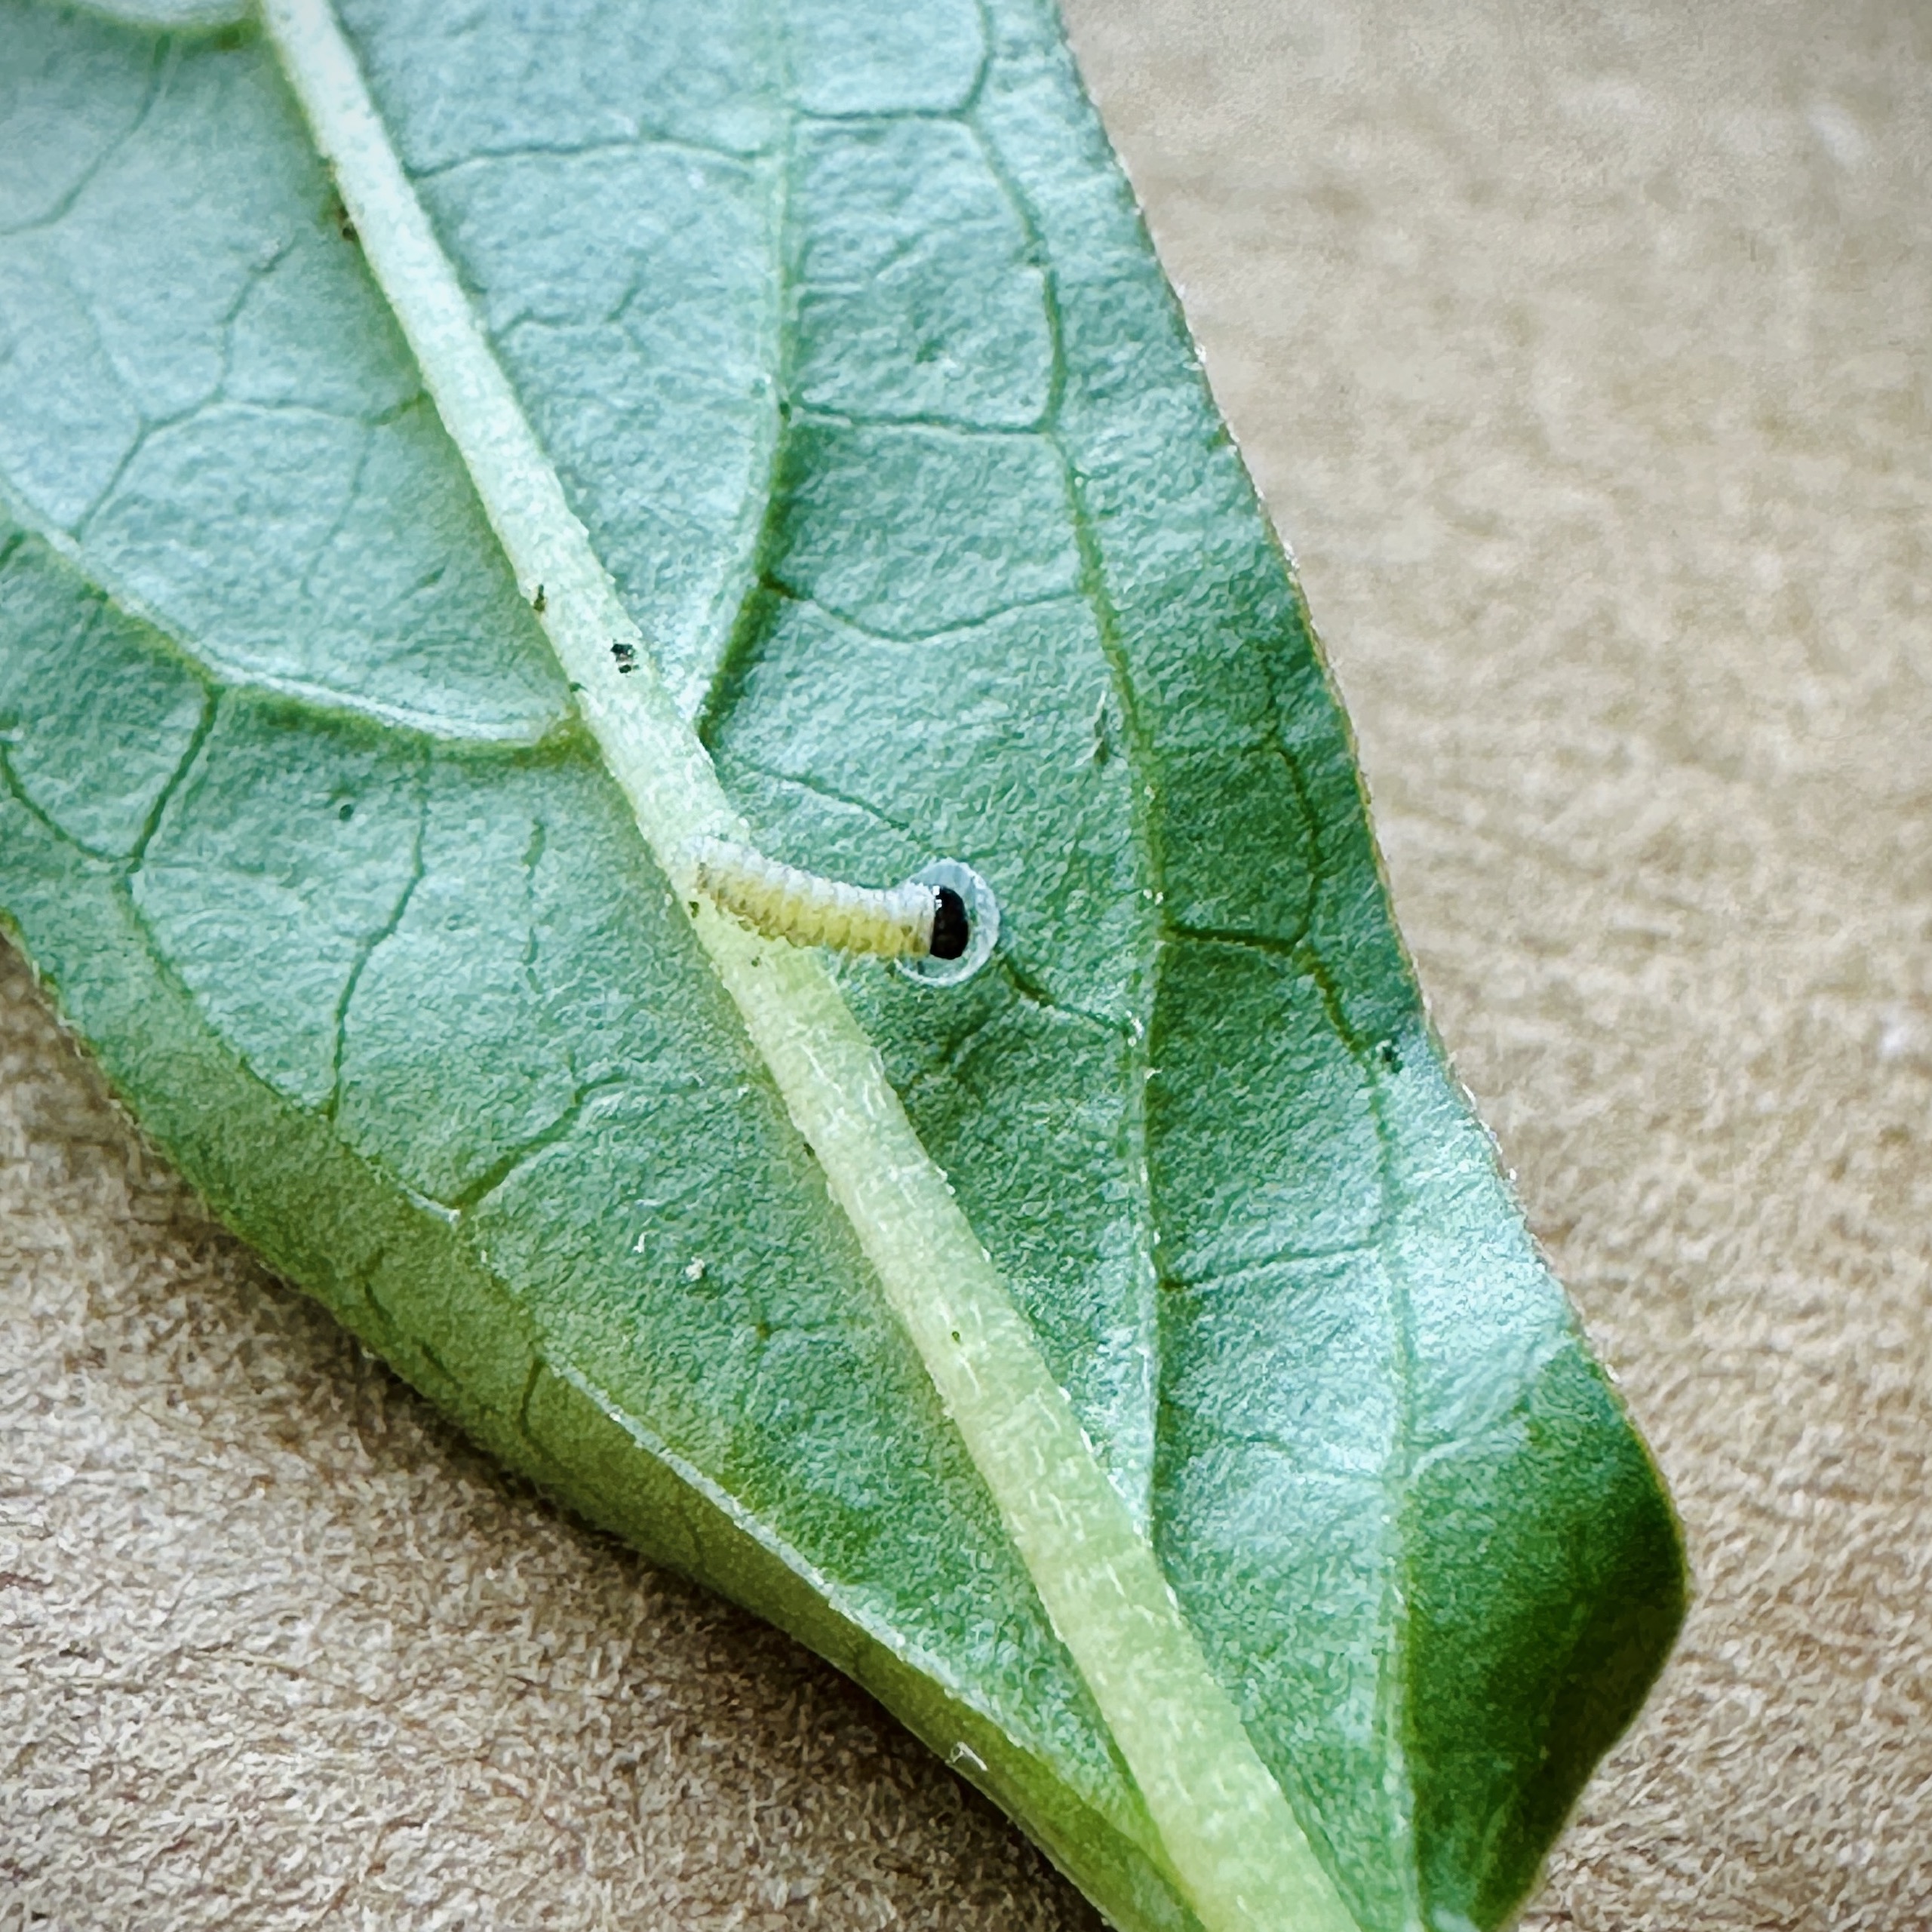 A tiny newly hatched monarch caterpillar